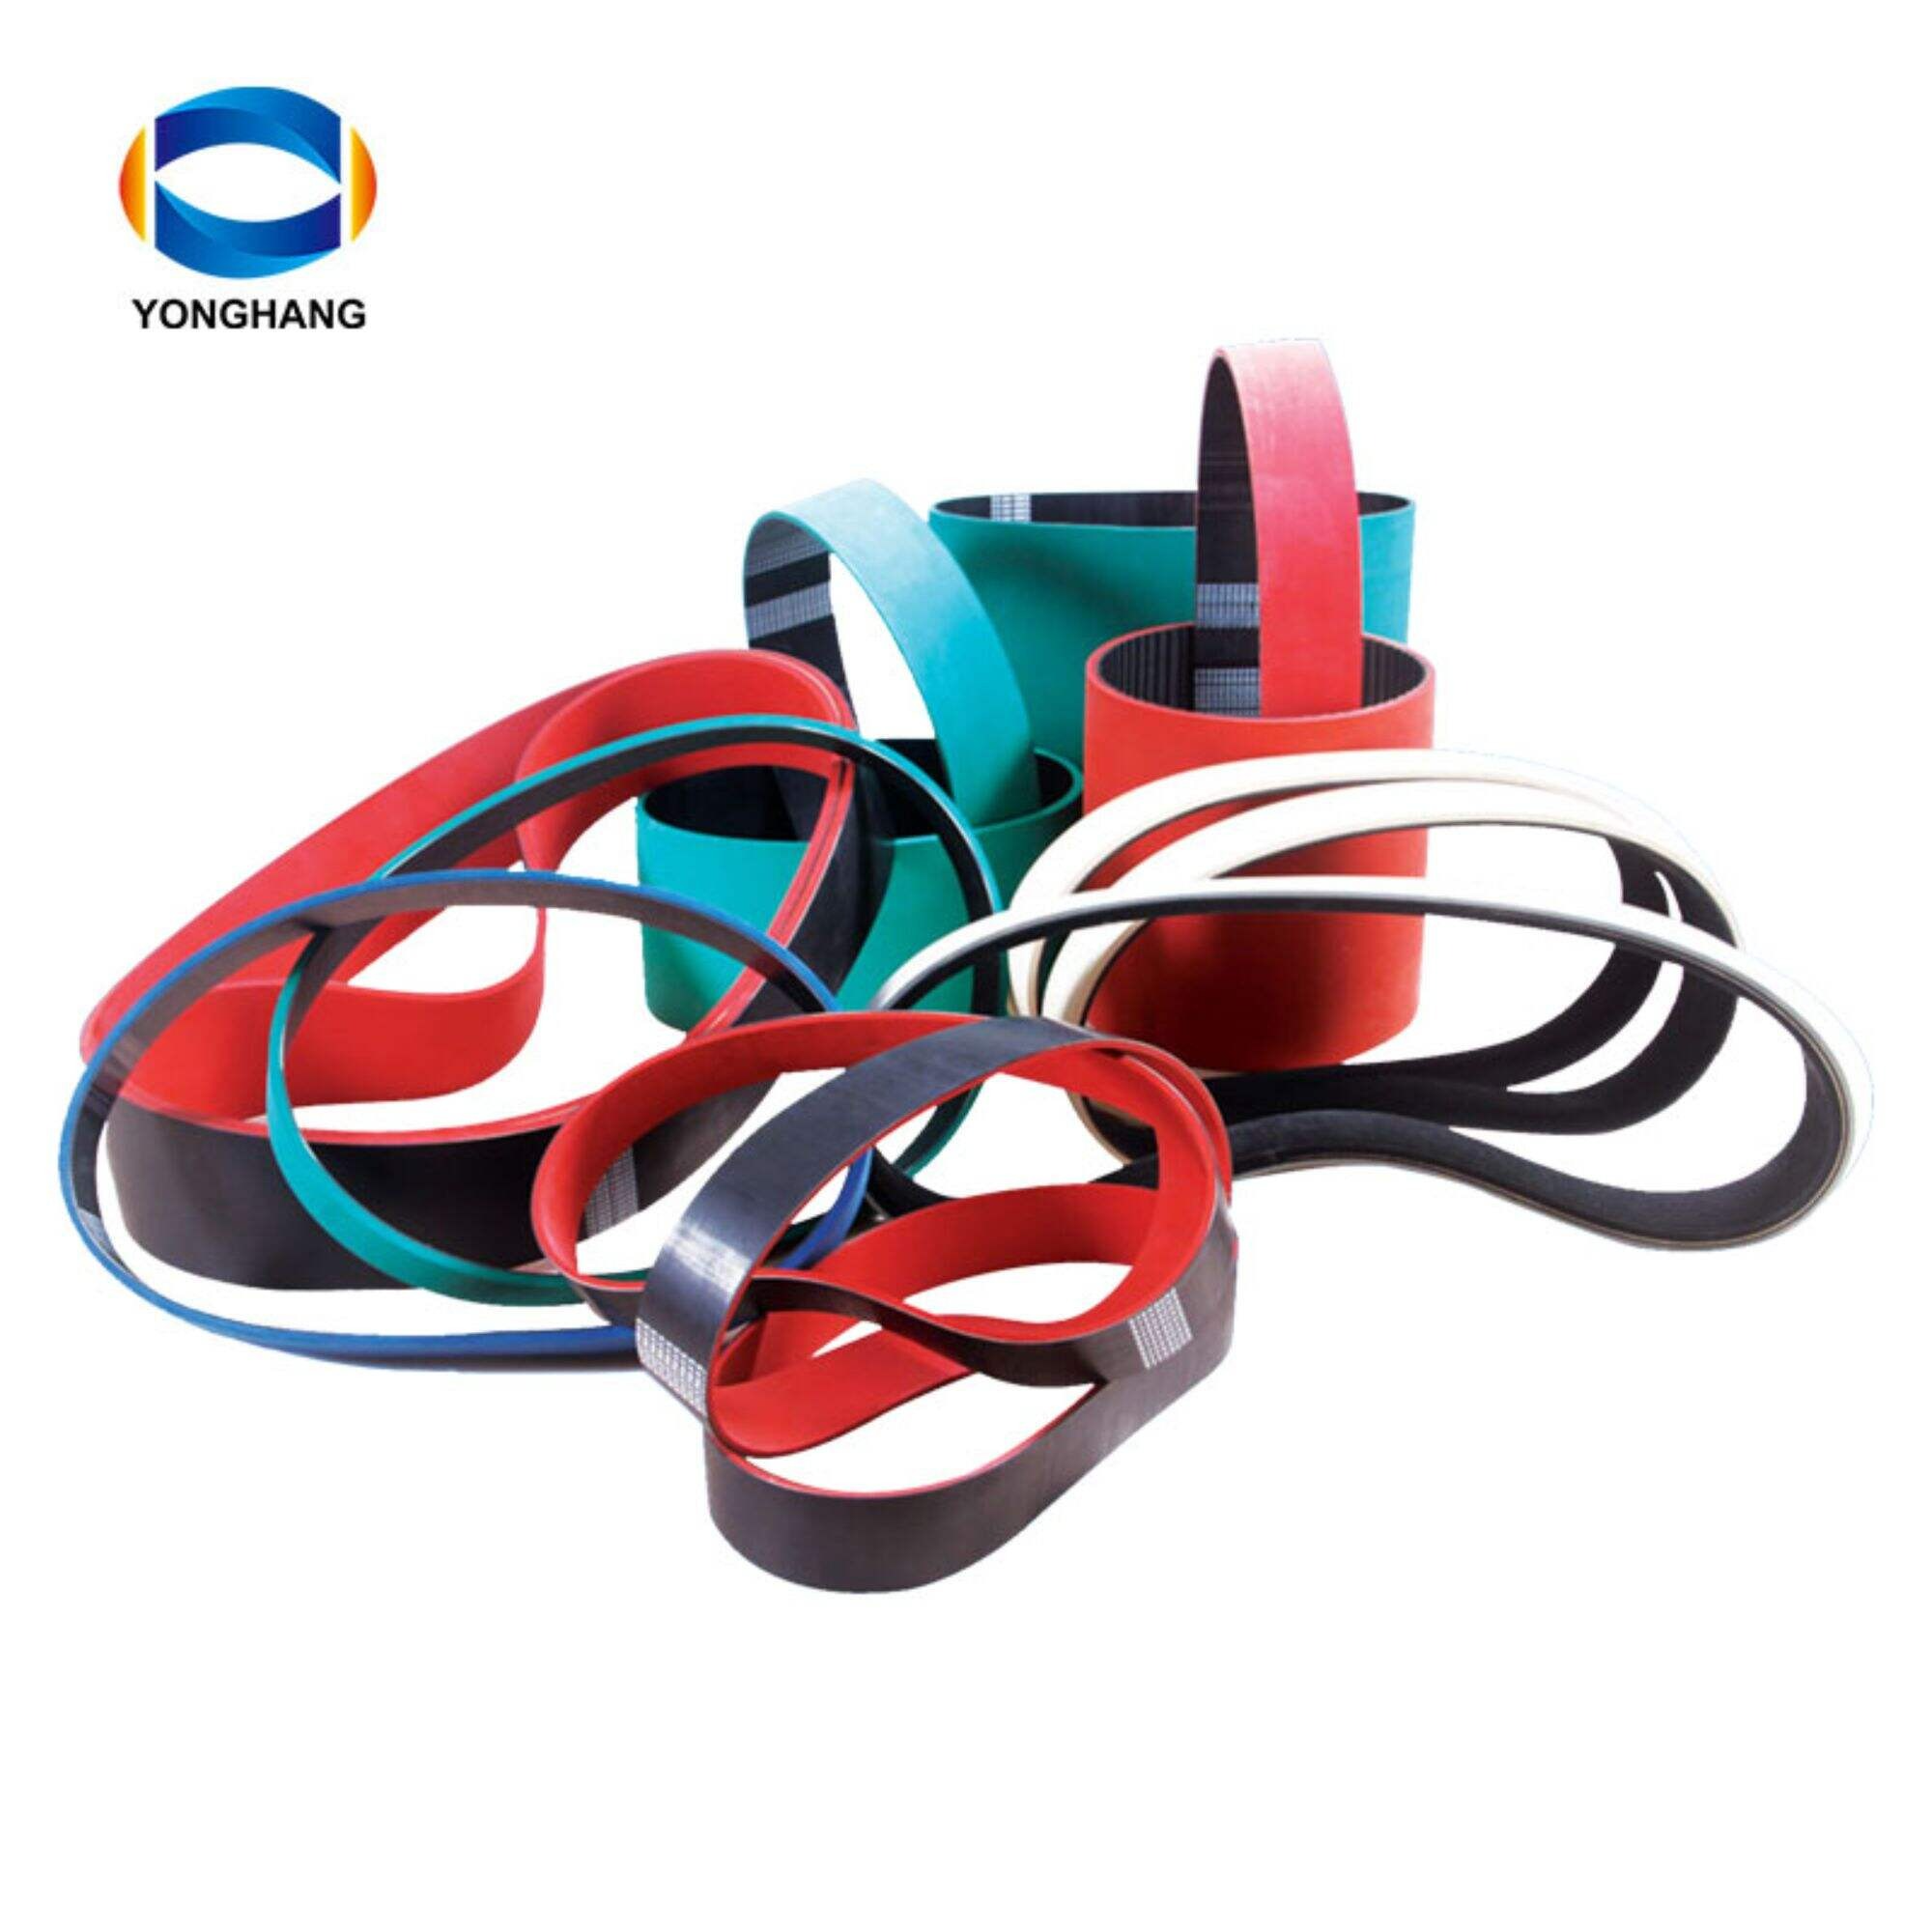 Welcome to Yonghang Transmission: Your Premier Destination for Flat Belts Solutions